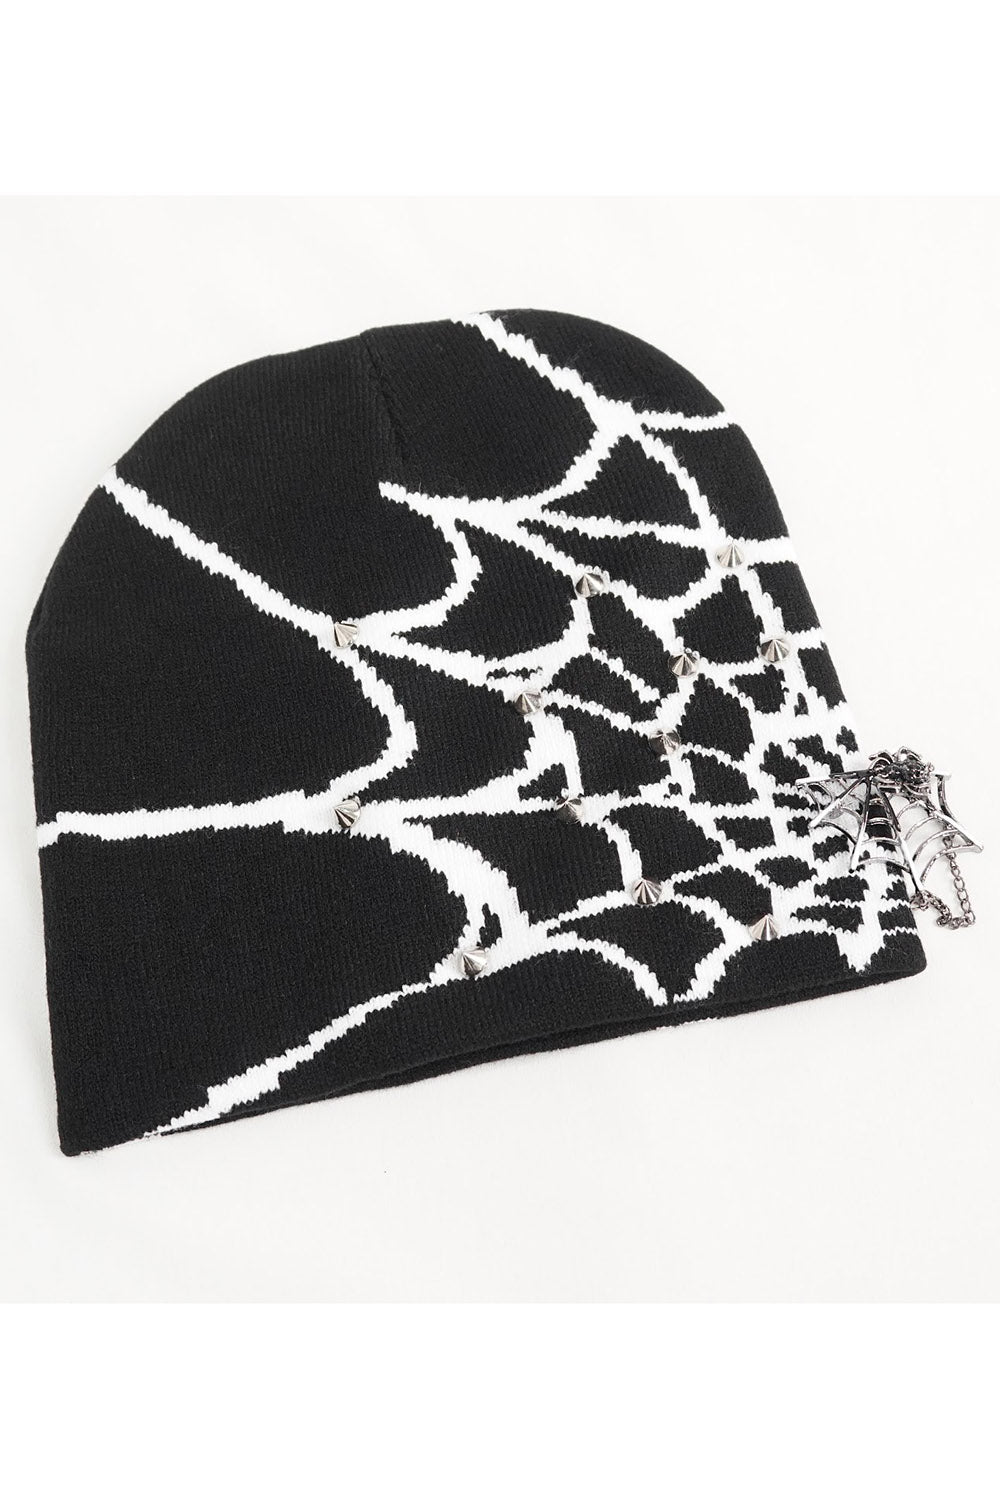 knitted spider hat